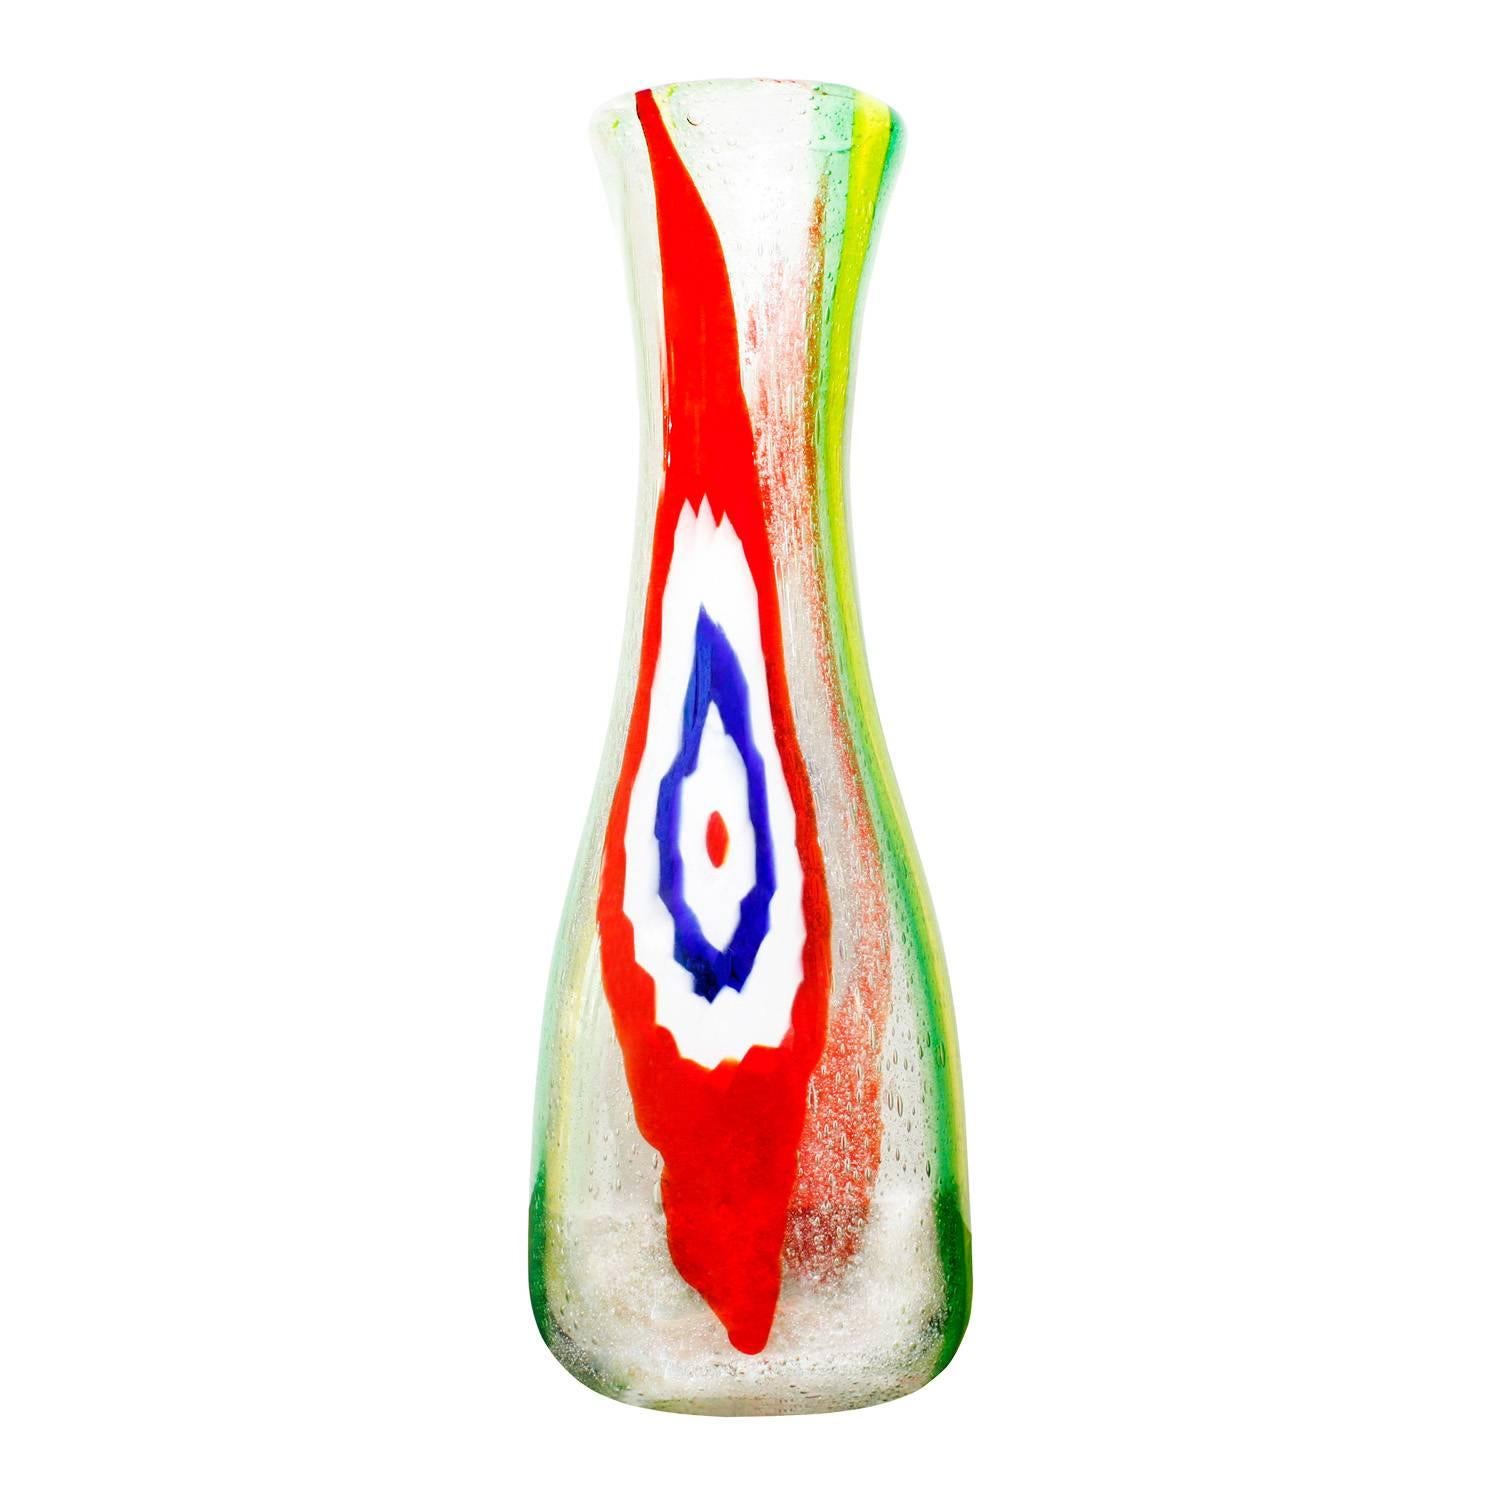 Large Handblown Glass Vase by Anzolo Fuga 1950s